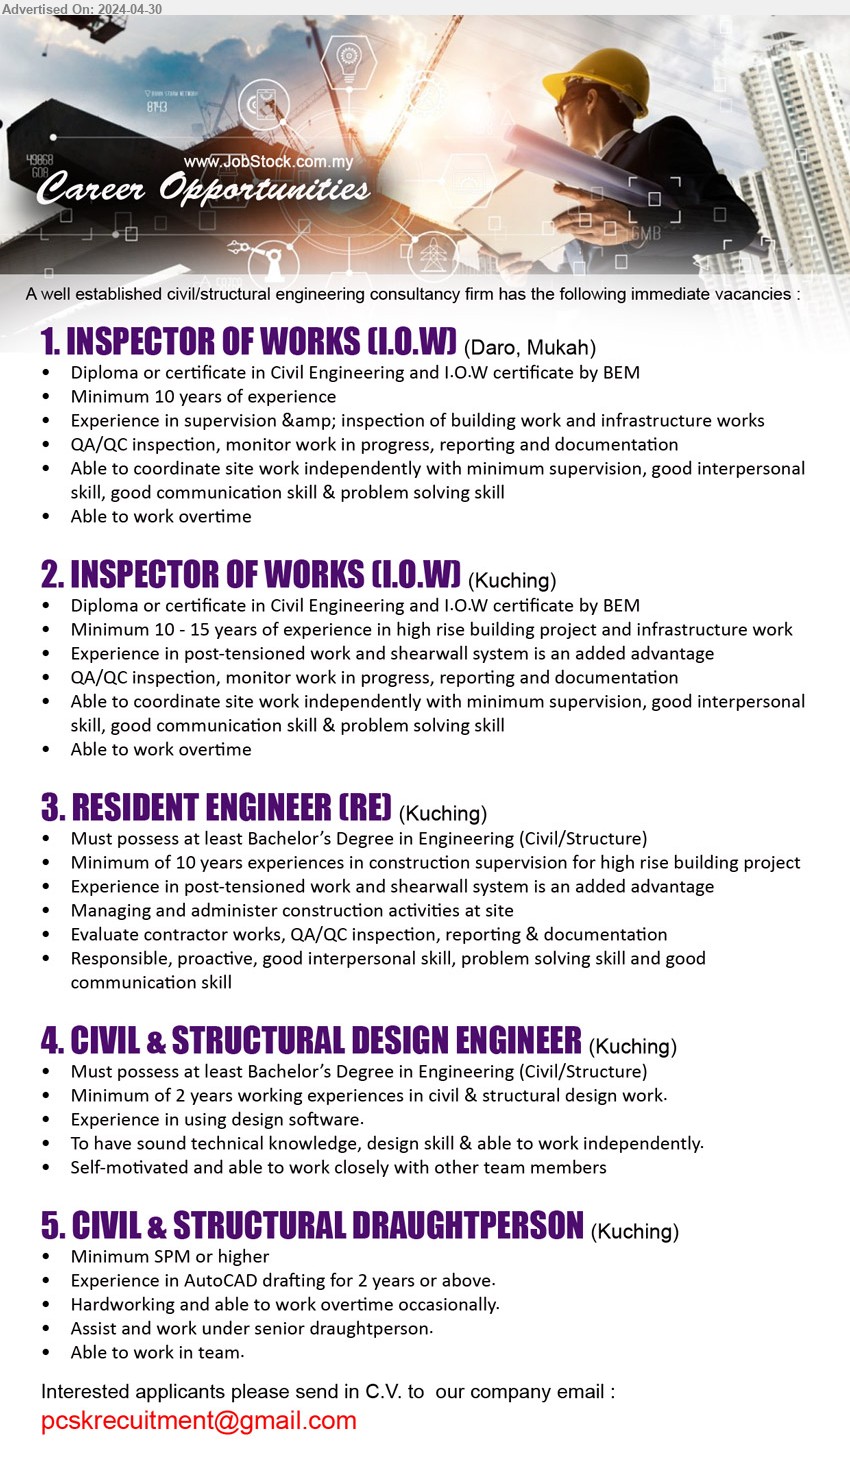 ADVERTISER (Civil / Structural Engineering Consultancy Firm) - 1. INSPECTOR OF WORKS (I.O.W) (Daro, Mukah), Diploma or Certificate in Civil Engineering and I.O.W certificate by BEM, 10 yrs. exp.,...
2. INSPECTOR OF WORKS (I.O.W) (Kuching), Diploma or Certificate in Civil Engineering and I.O.W certificate by BEM, 10-15 yrs. exp.,...
3. RESIDENT ENGINEER (RE)  (Kuching), Bachelor’s Degree in Engineering (Civil/Structure), 10 yrs. exp.,...
4. CIVIL & STRUCTURAL DESIGN ENGINEER (Kuching), Bachelor’s Degree in Engineering (Civil/Structure), 2 yrs. exp.,...
5. CIVIL & STRUCTURAL DRAUGHTPERSON (Kuching), SPM, Experience in AutoCAD drafting for 2 years or above.,...
Email resume to ...